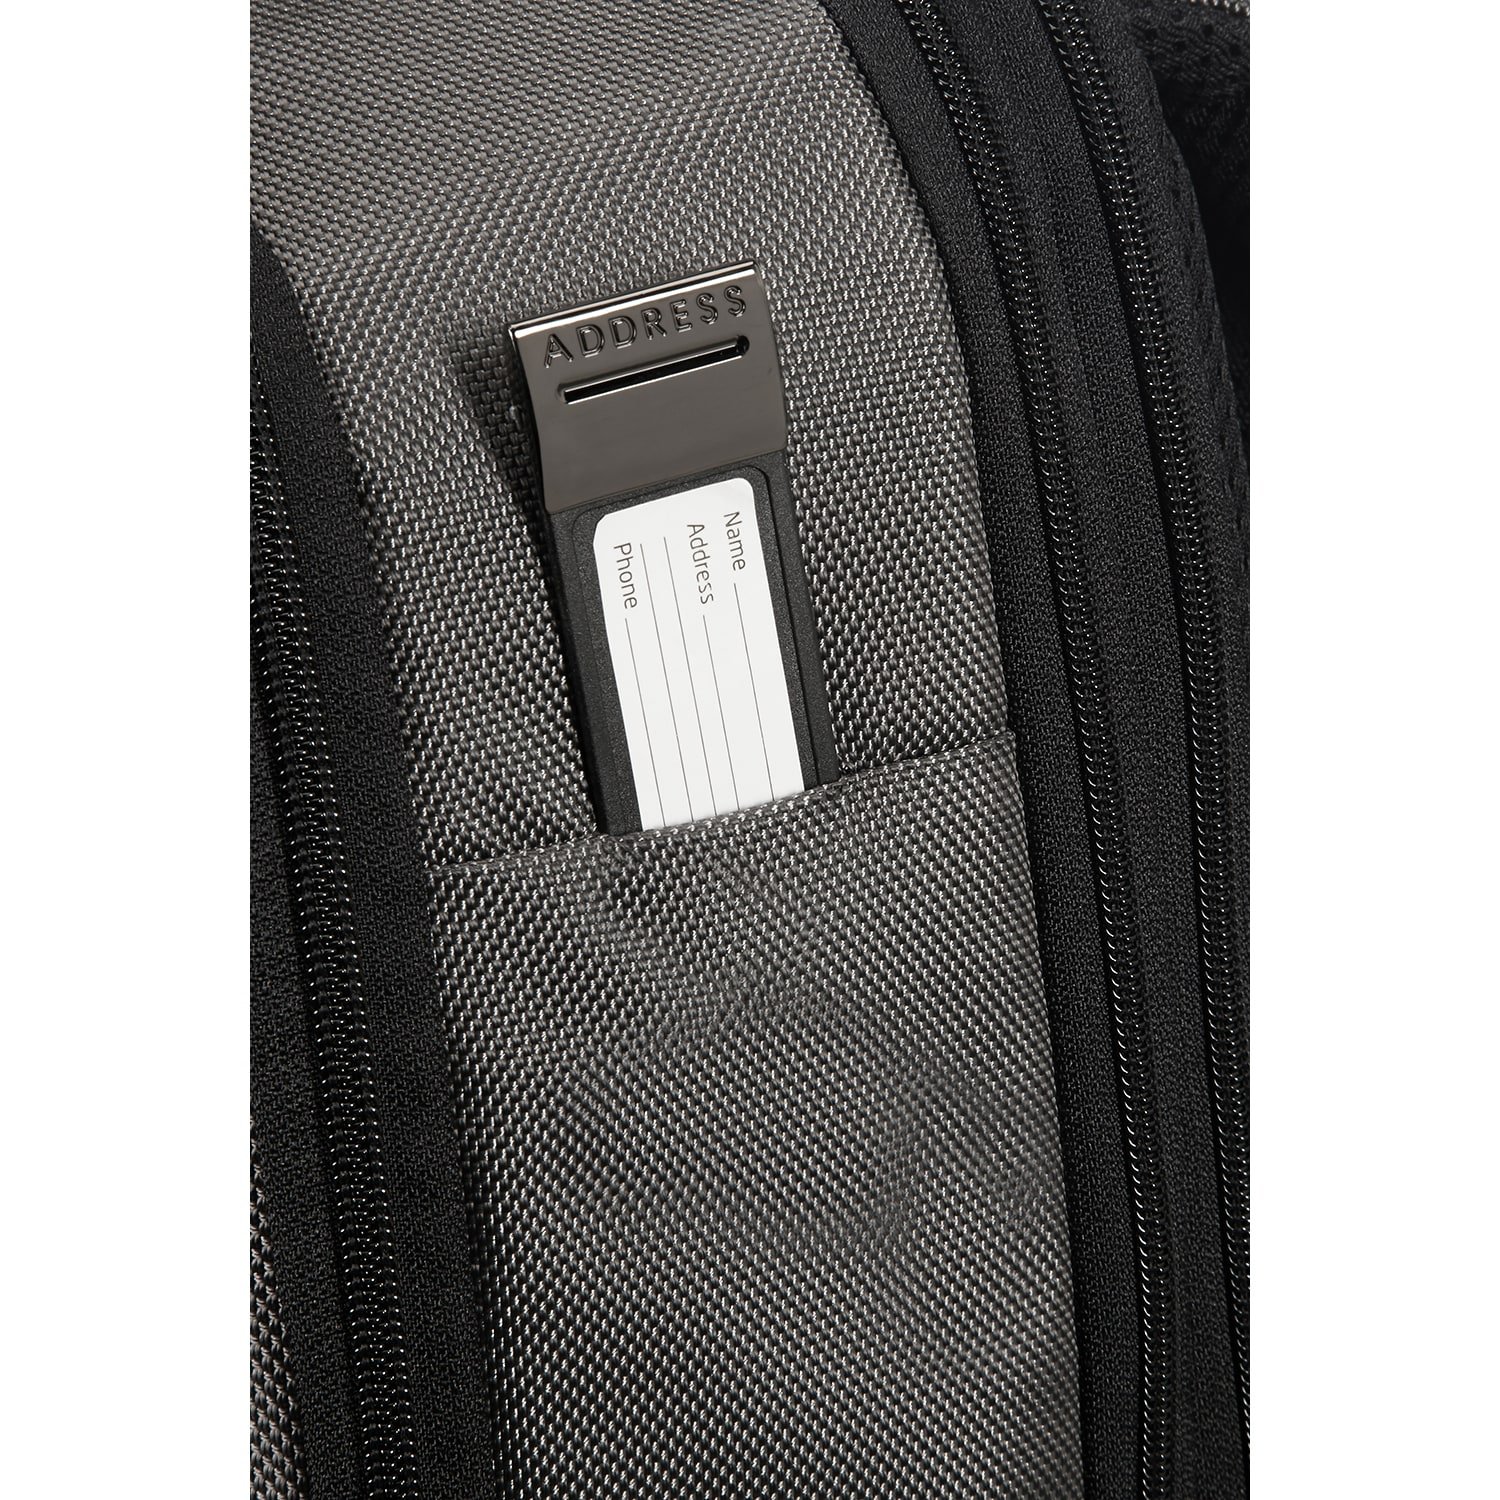 PRO-DLX 5-LAPT.BACKPACK 15.6'' EXP SCG7-008-SF000*08